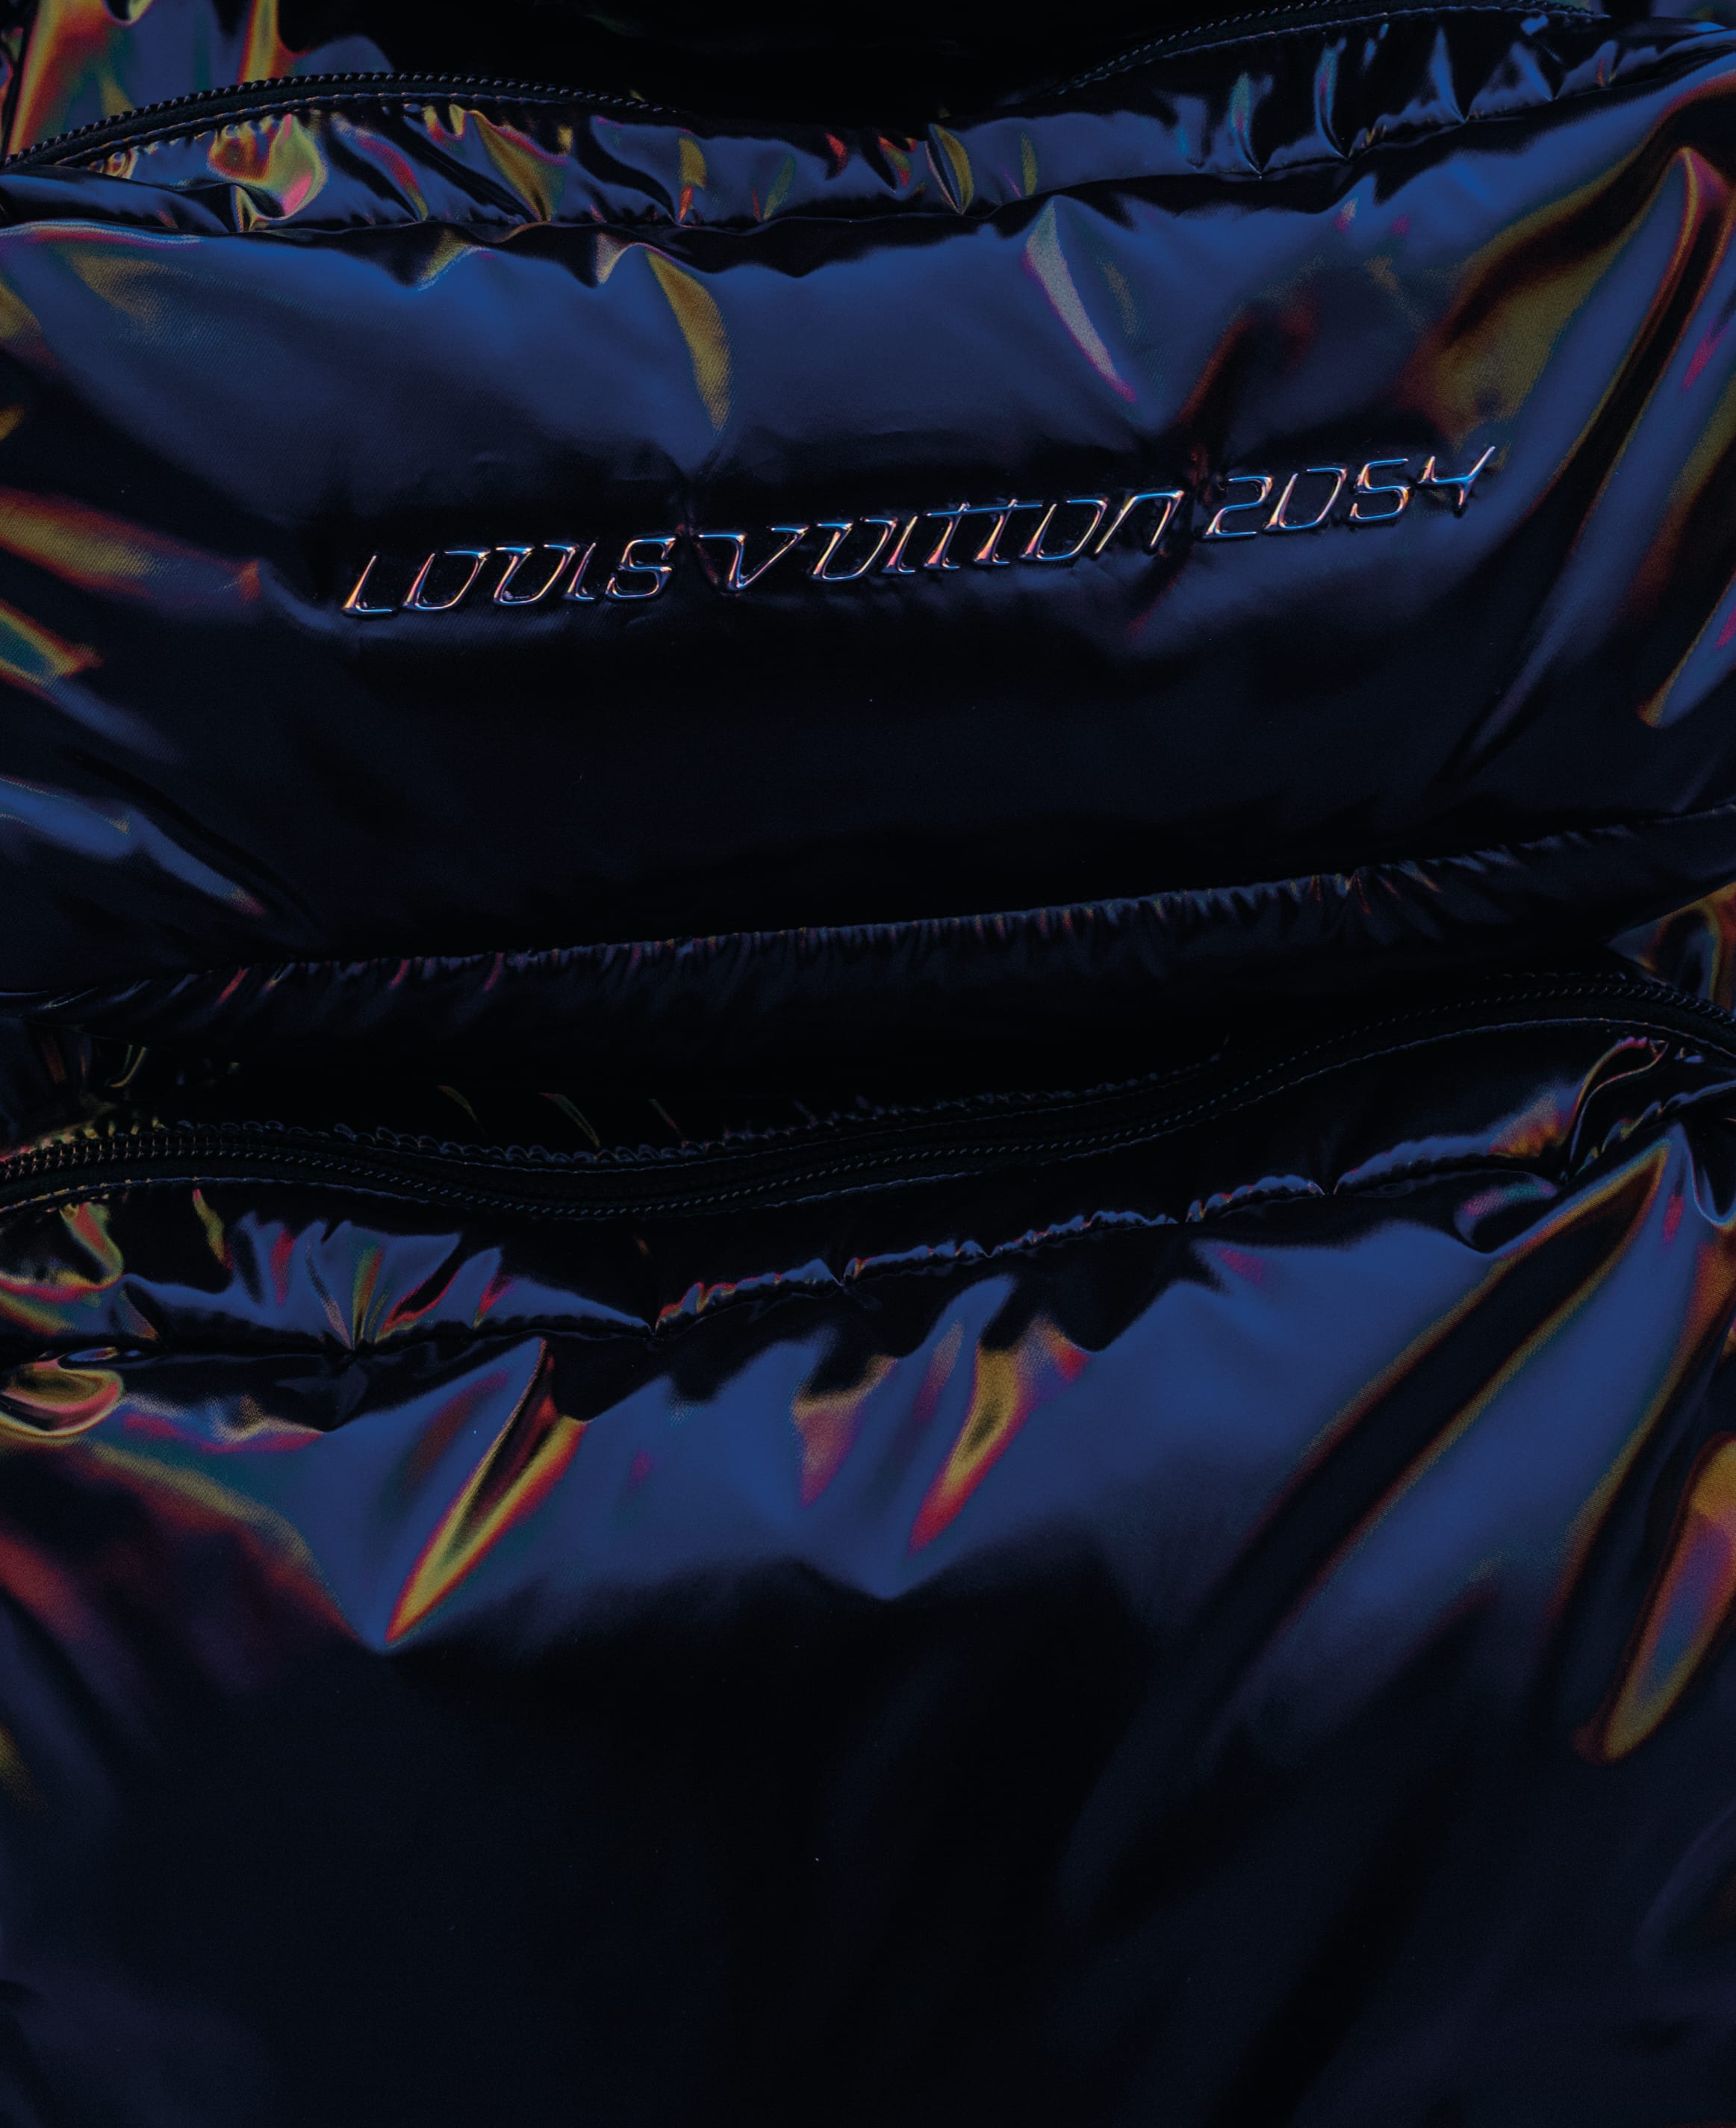 virgil abloh on X: internally referred to as [ LV 2054 ] from